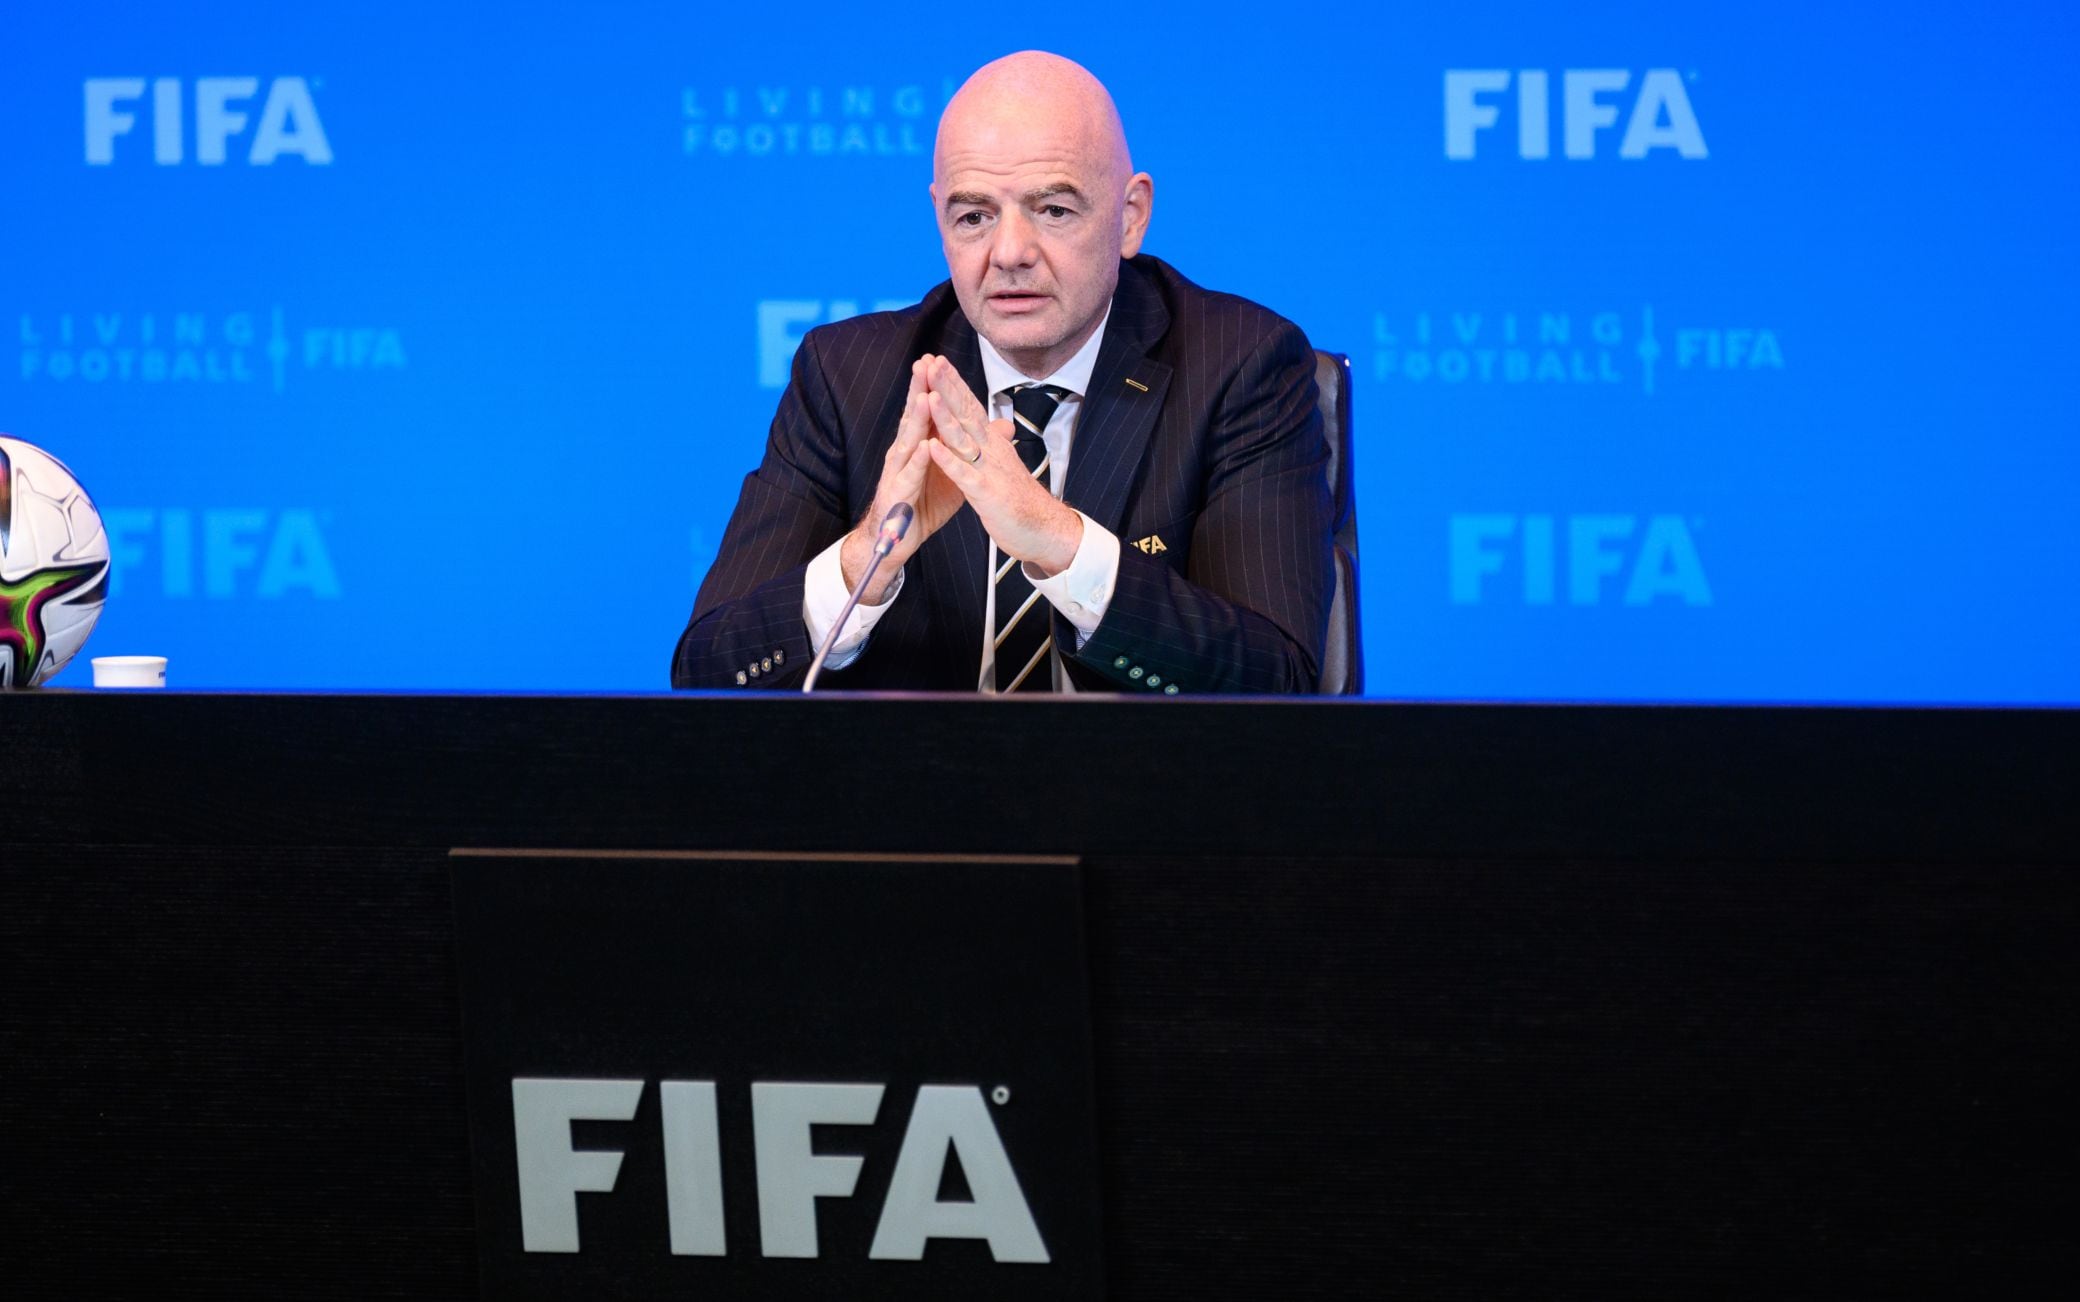 Fifa, Infantino: “The summit of December 20 for the World Cup every two years”